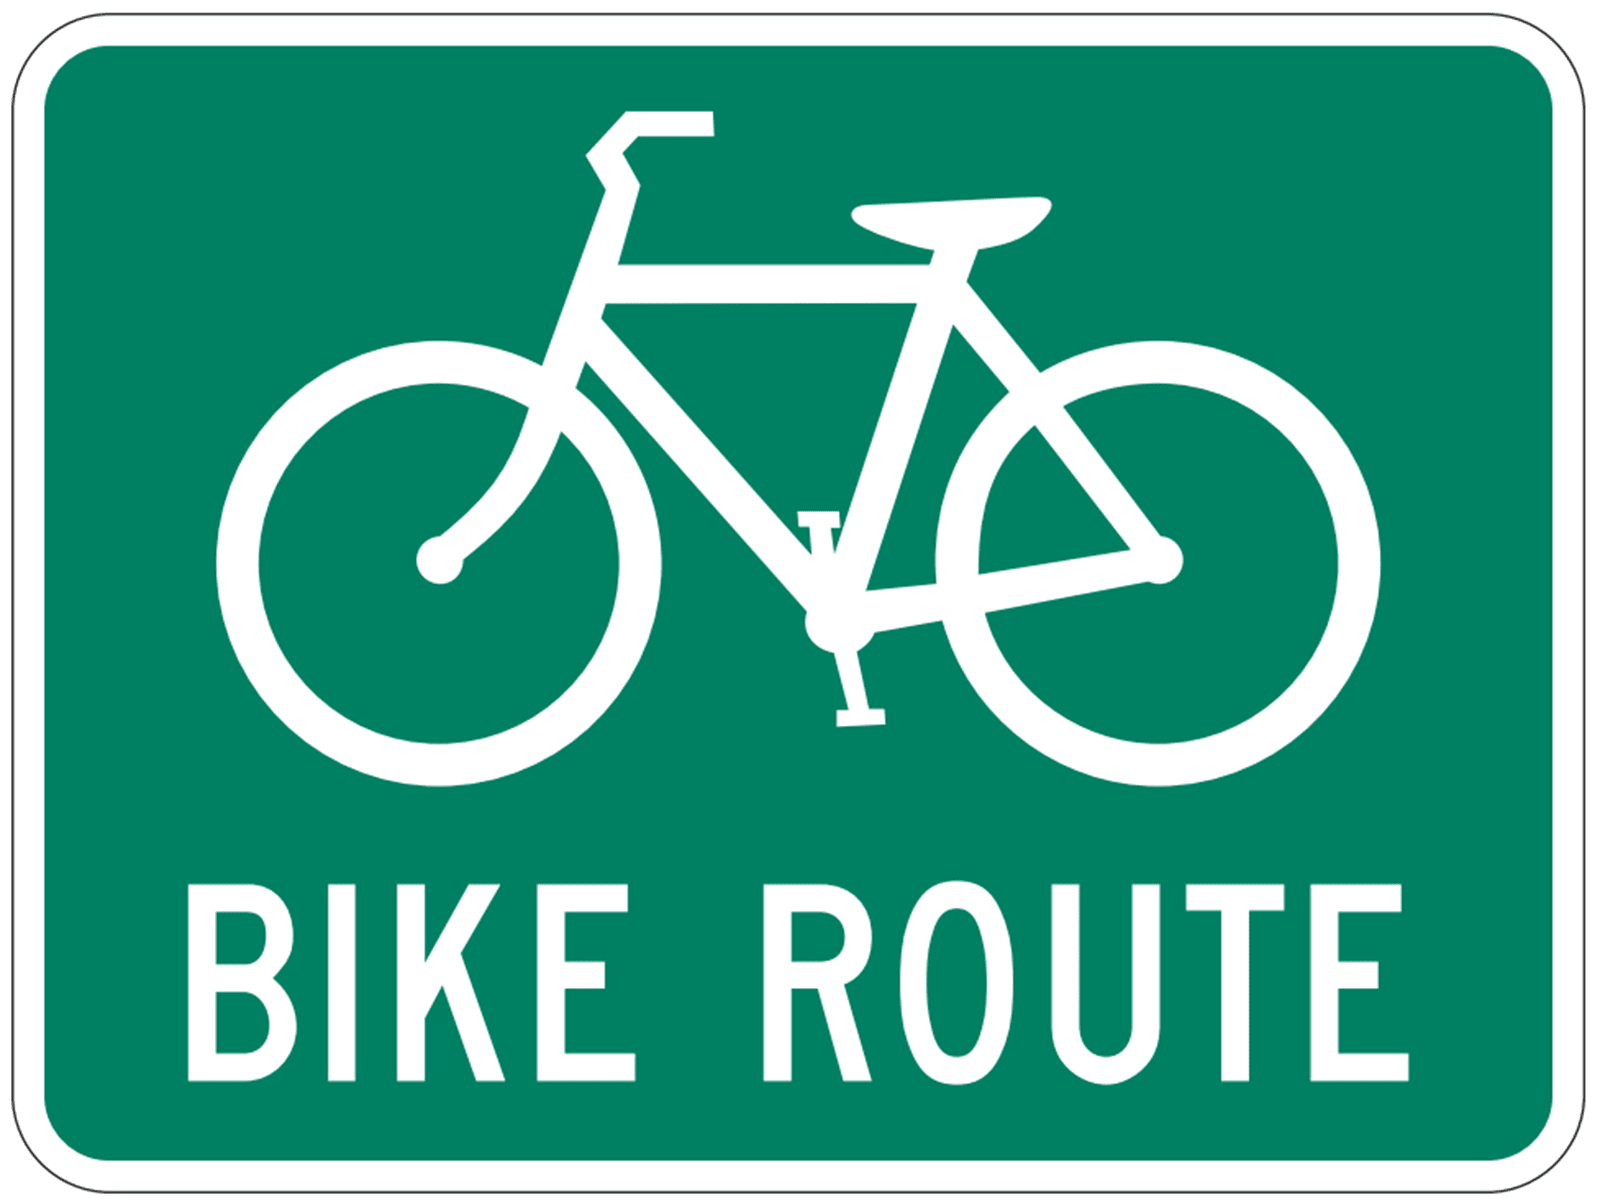 Bike Route D11-1 - Toll road Signs